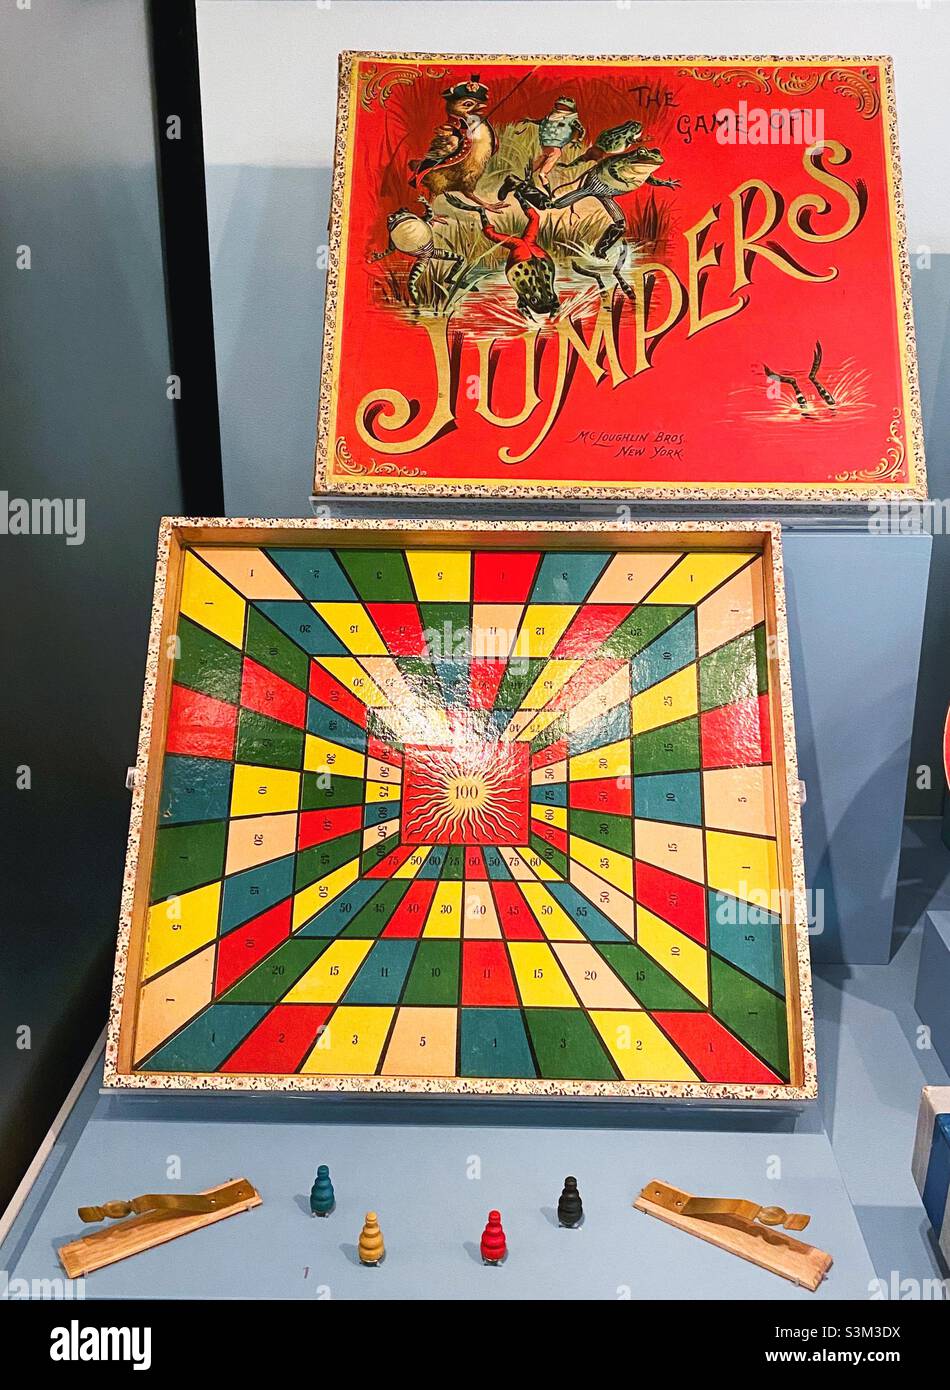 The game of Jumpers from 1900. Stock Photo